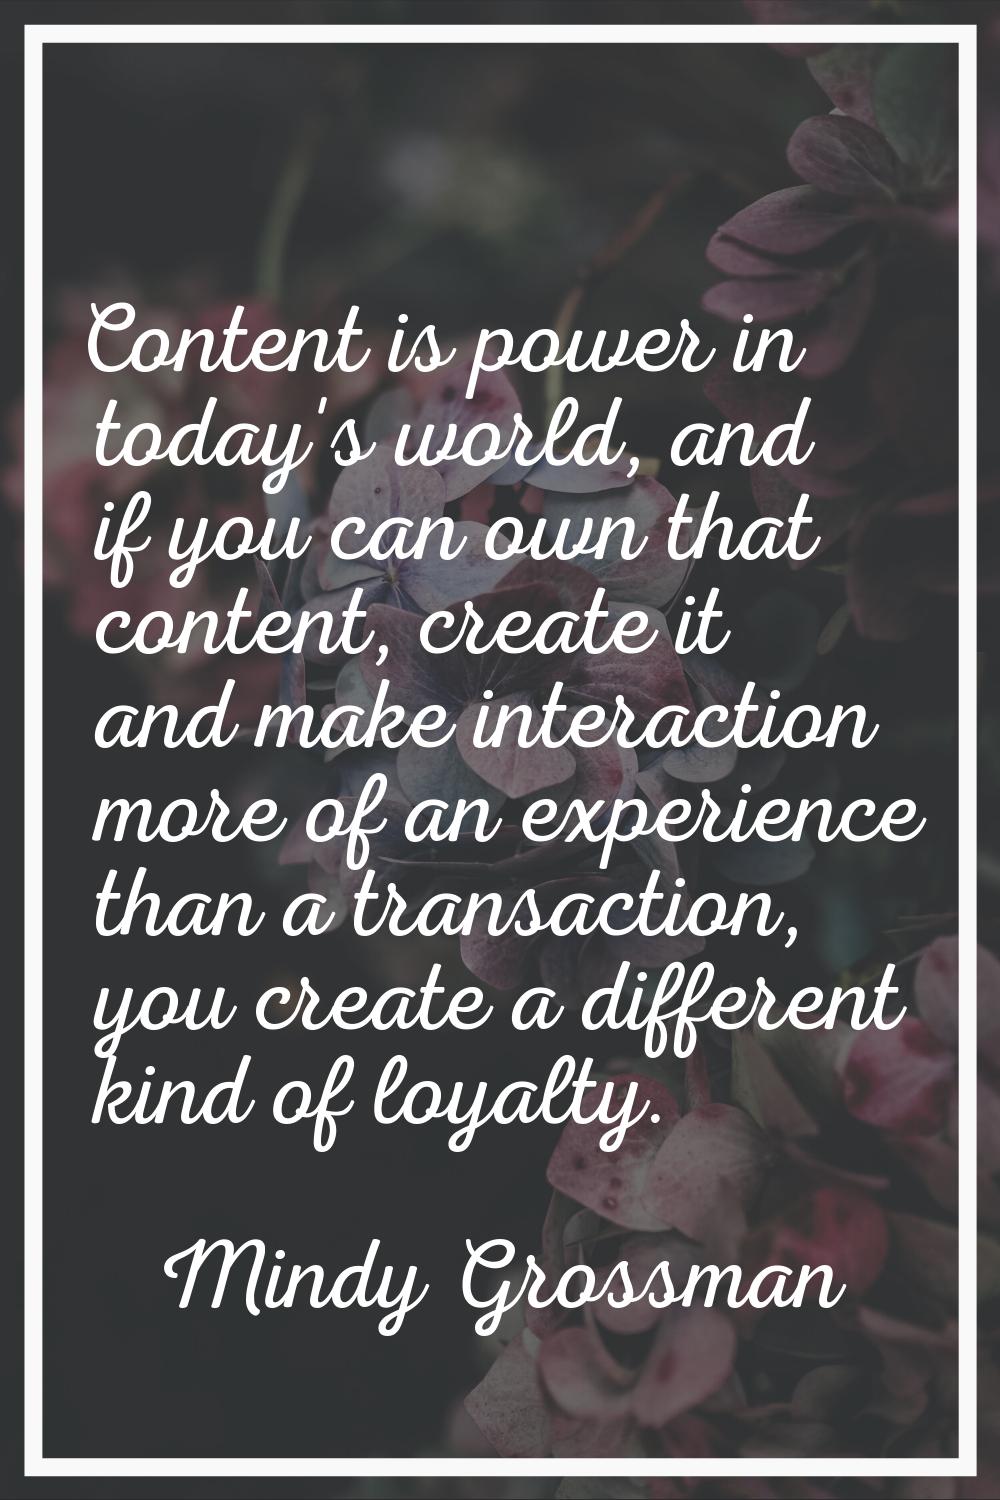 Content is power in today's world, and if you can own that content, create it and make interaction 